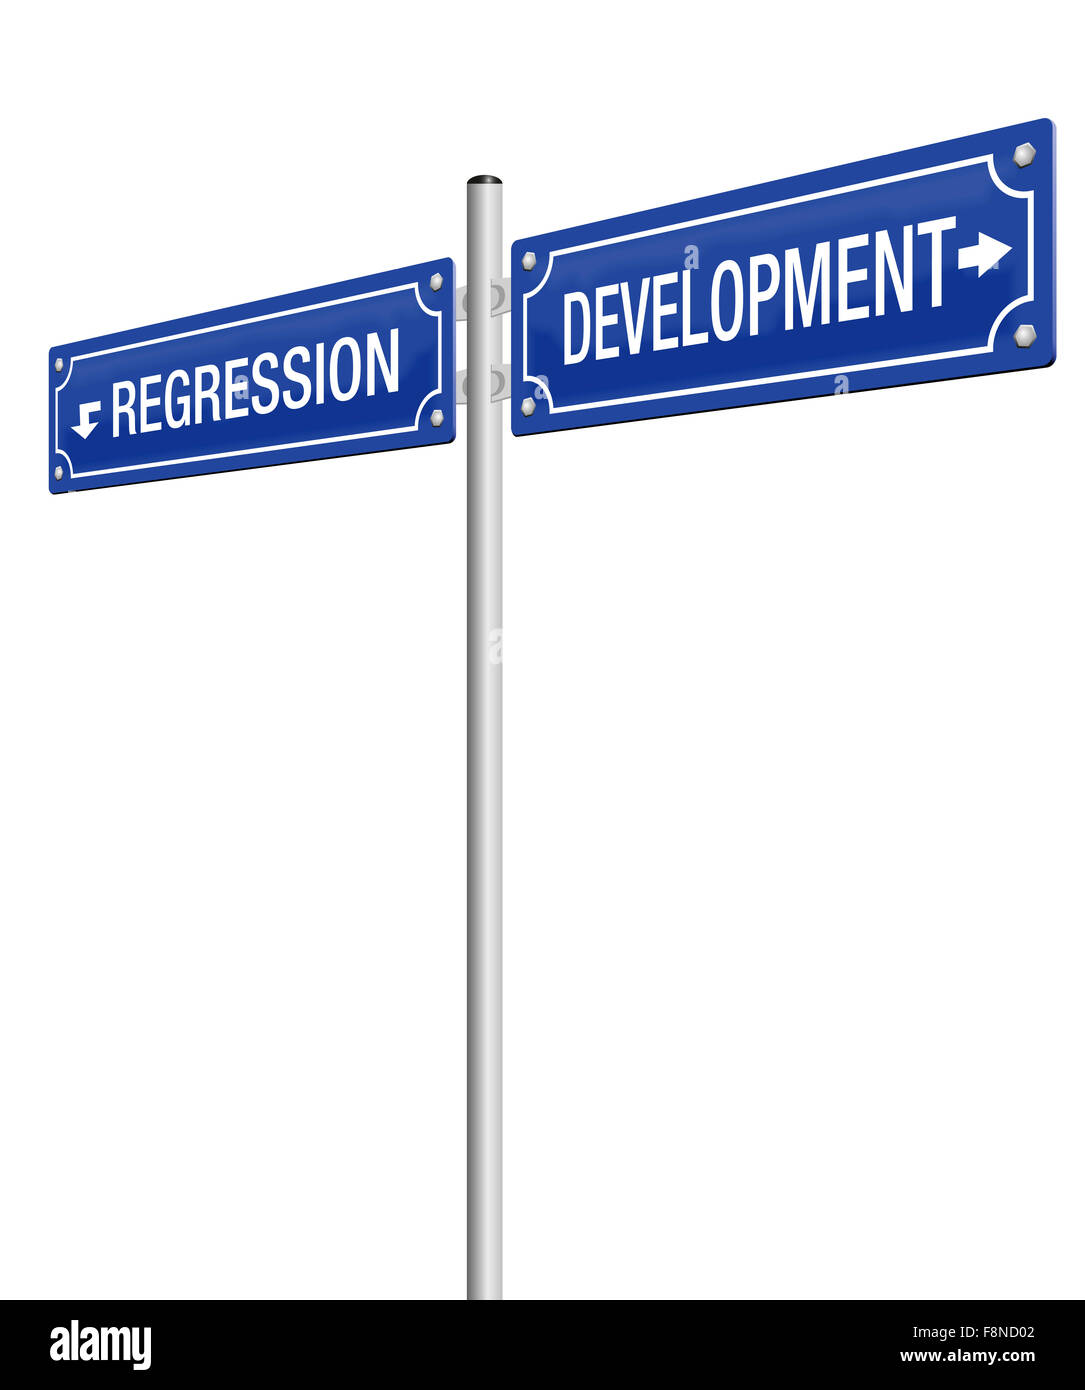 DEVELOPMENT and REGRESSION, written on two signposts. Illustration on white background. Stock Photo